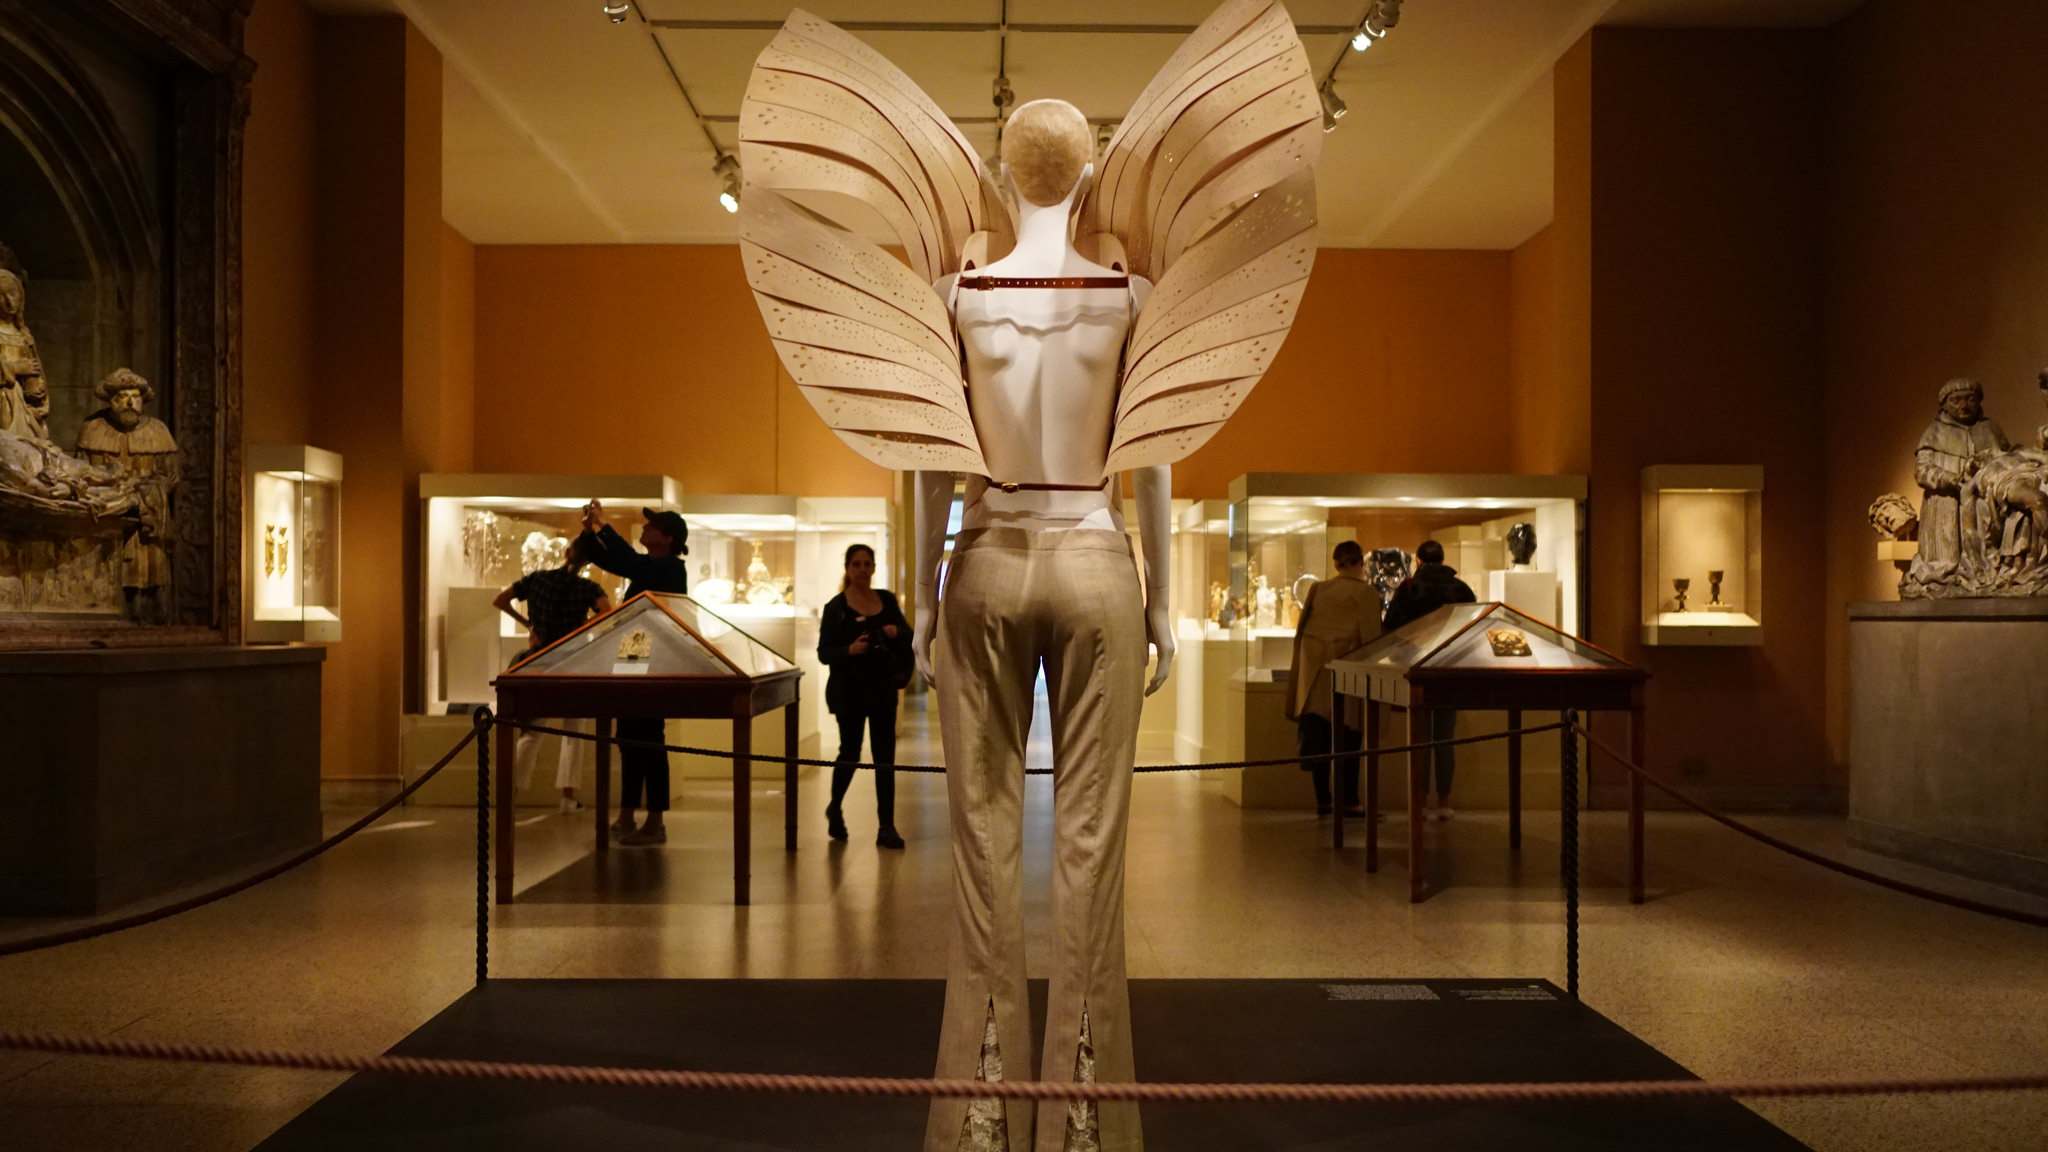 heavenly bodies14 Heavenly Bodies: Fashion and the Catholic Imagination in MET